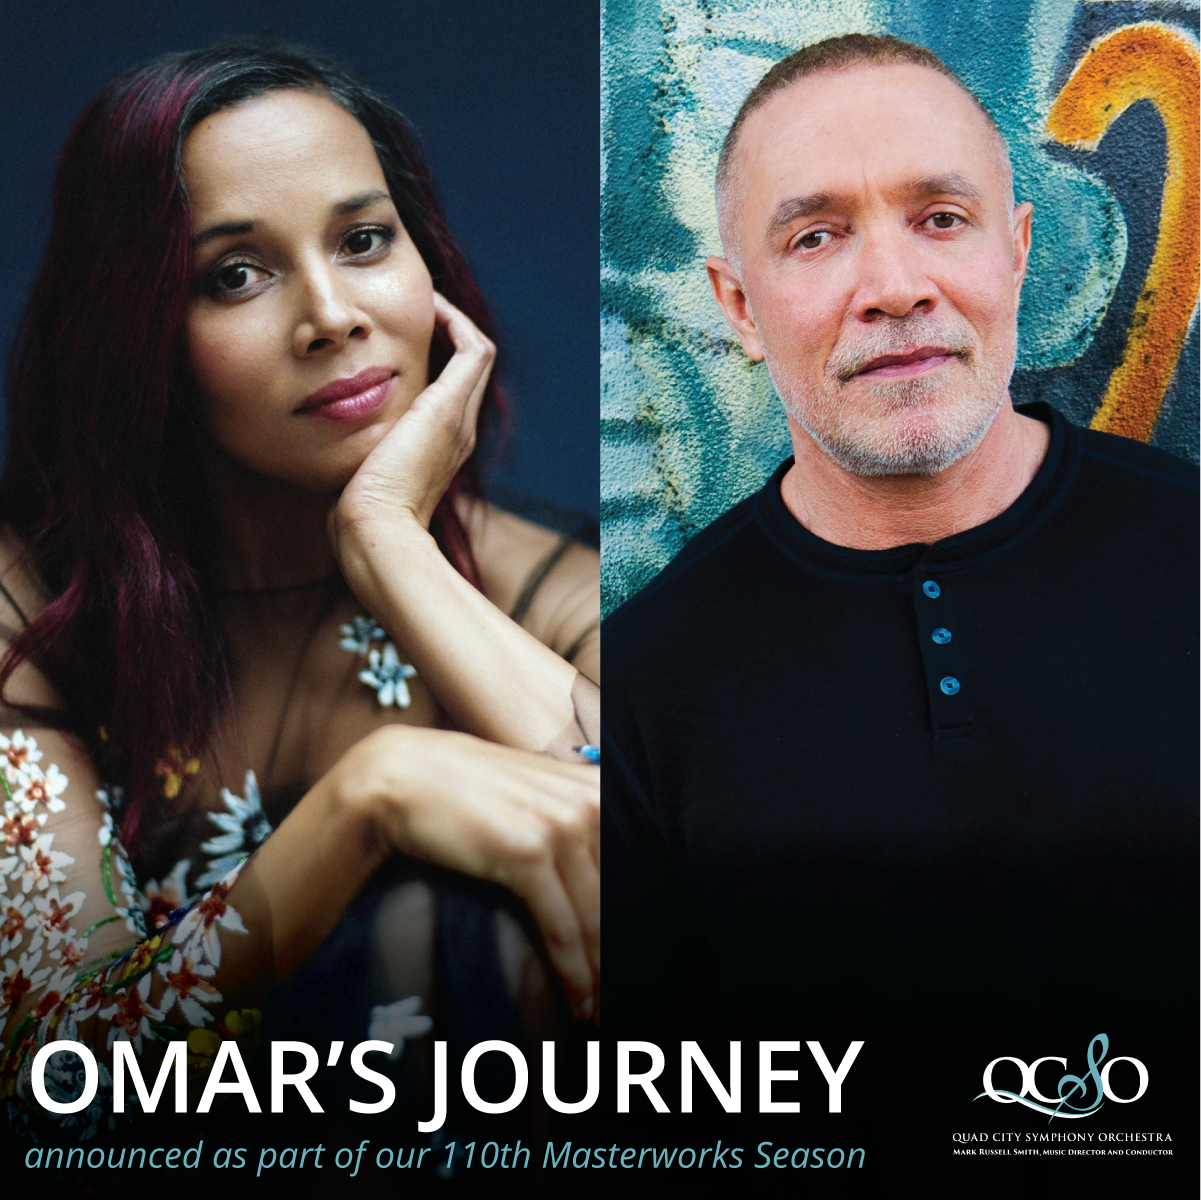 QCSO Announces Opera Omar’s Journey as Part of Its 110th Masterworks Season